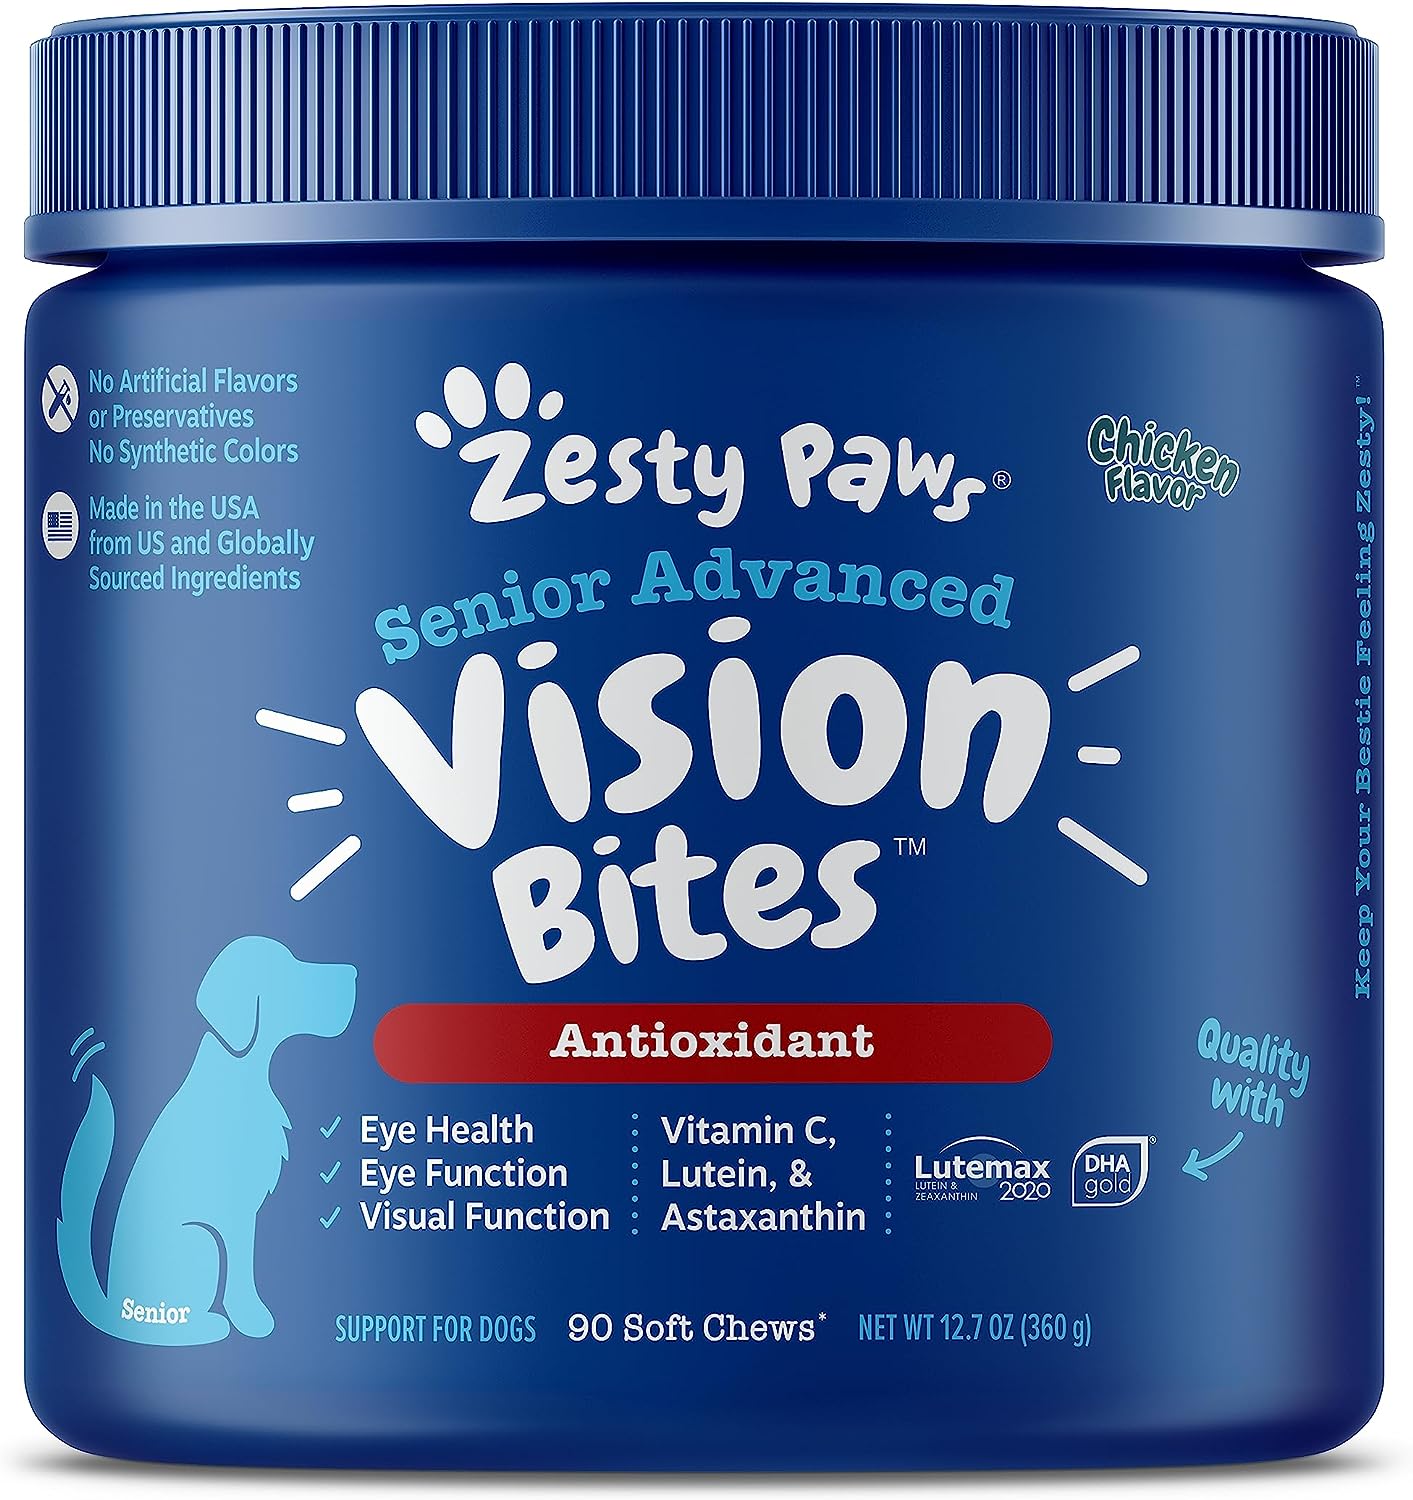 Zesty Paws Eye Supplement for Dogs - Vision Support with Antioxidants & Omega 3 Fatty Acids - 90 Chews